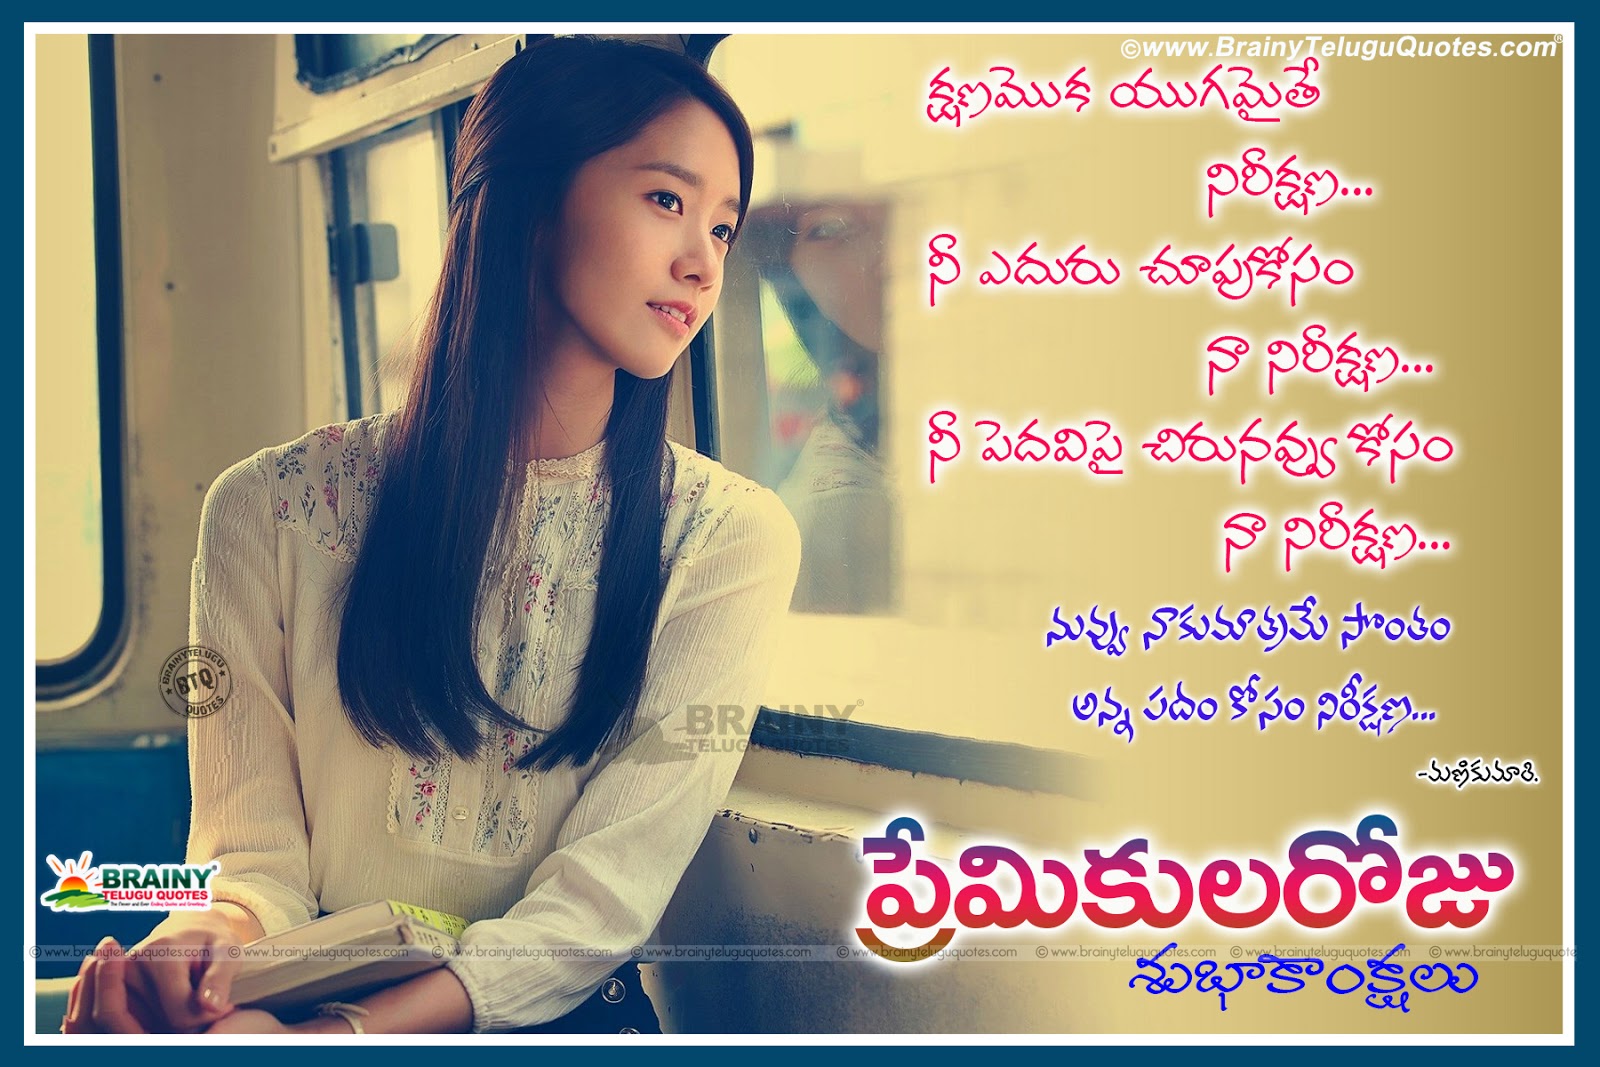 Valentines Day Telugu Love Quotes Wishes Sms Messages Greetings